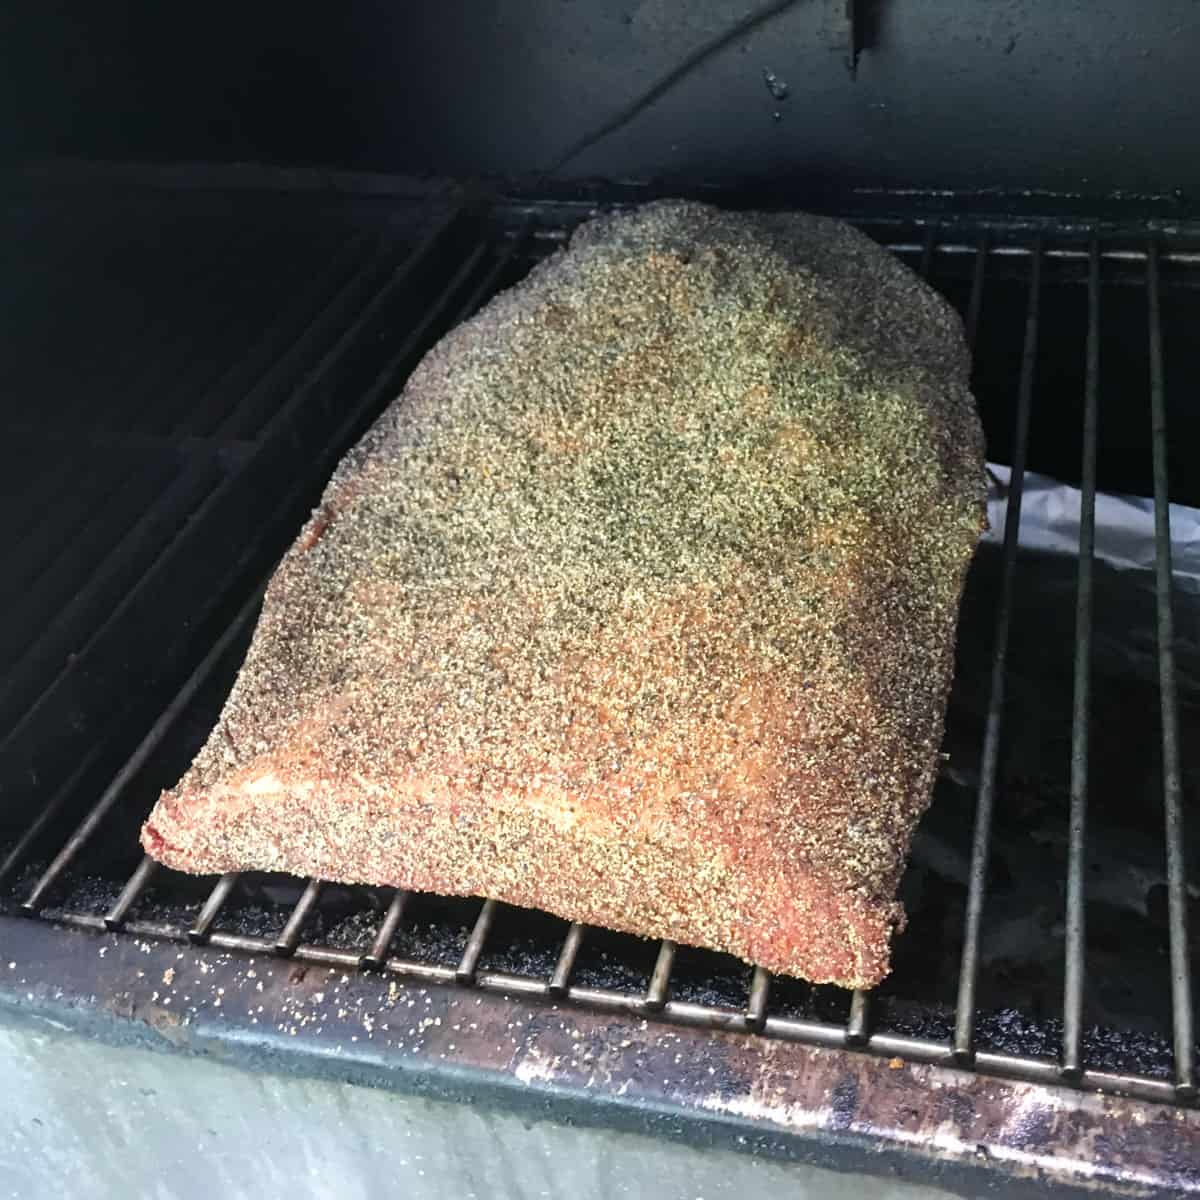 A whole brisket in a smoker.